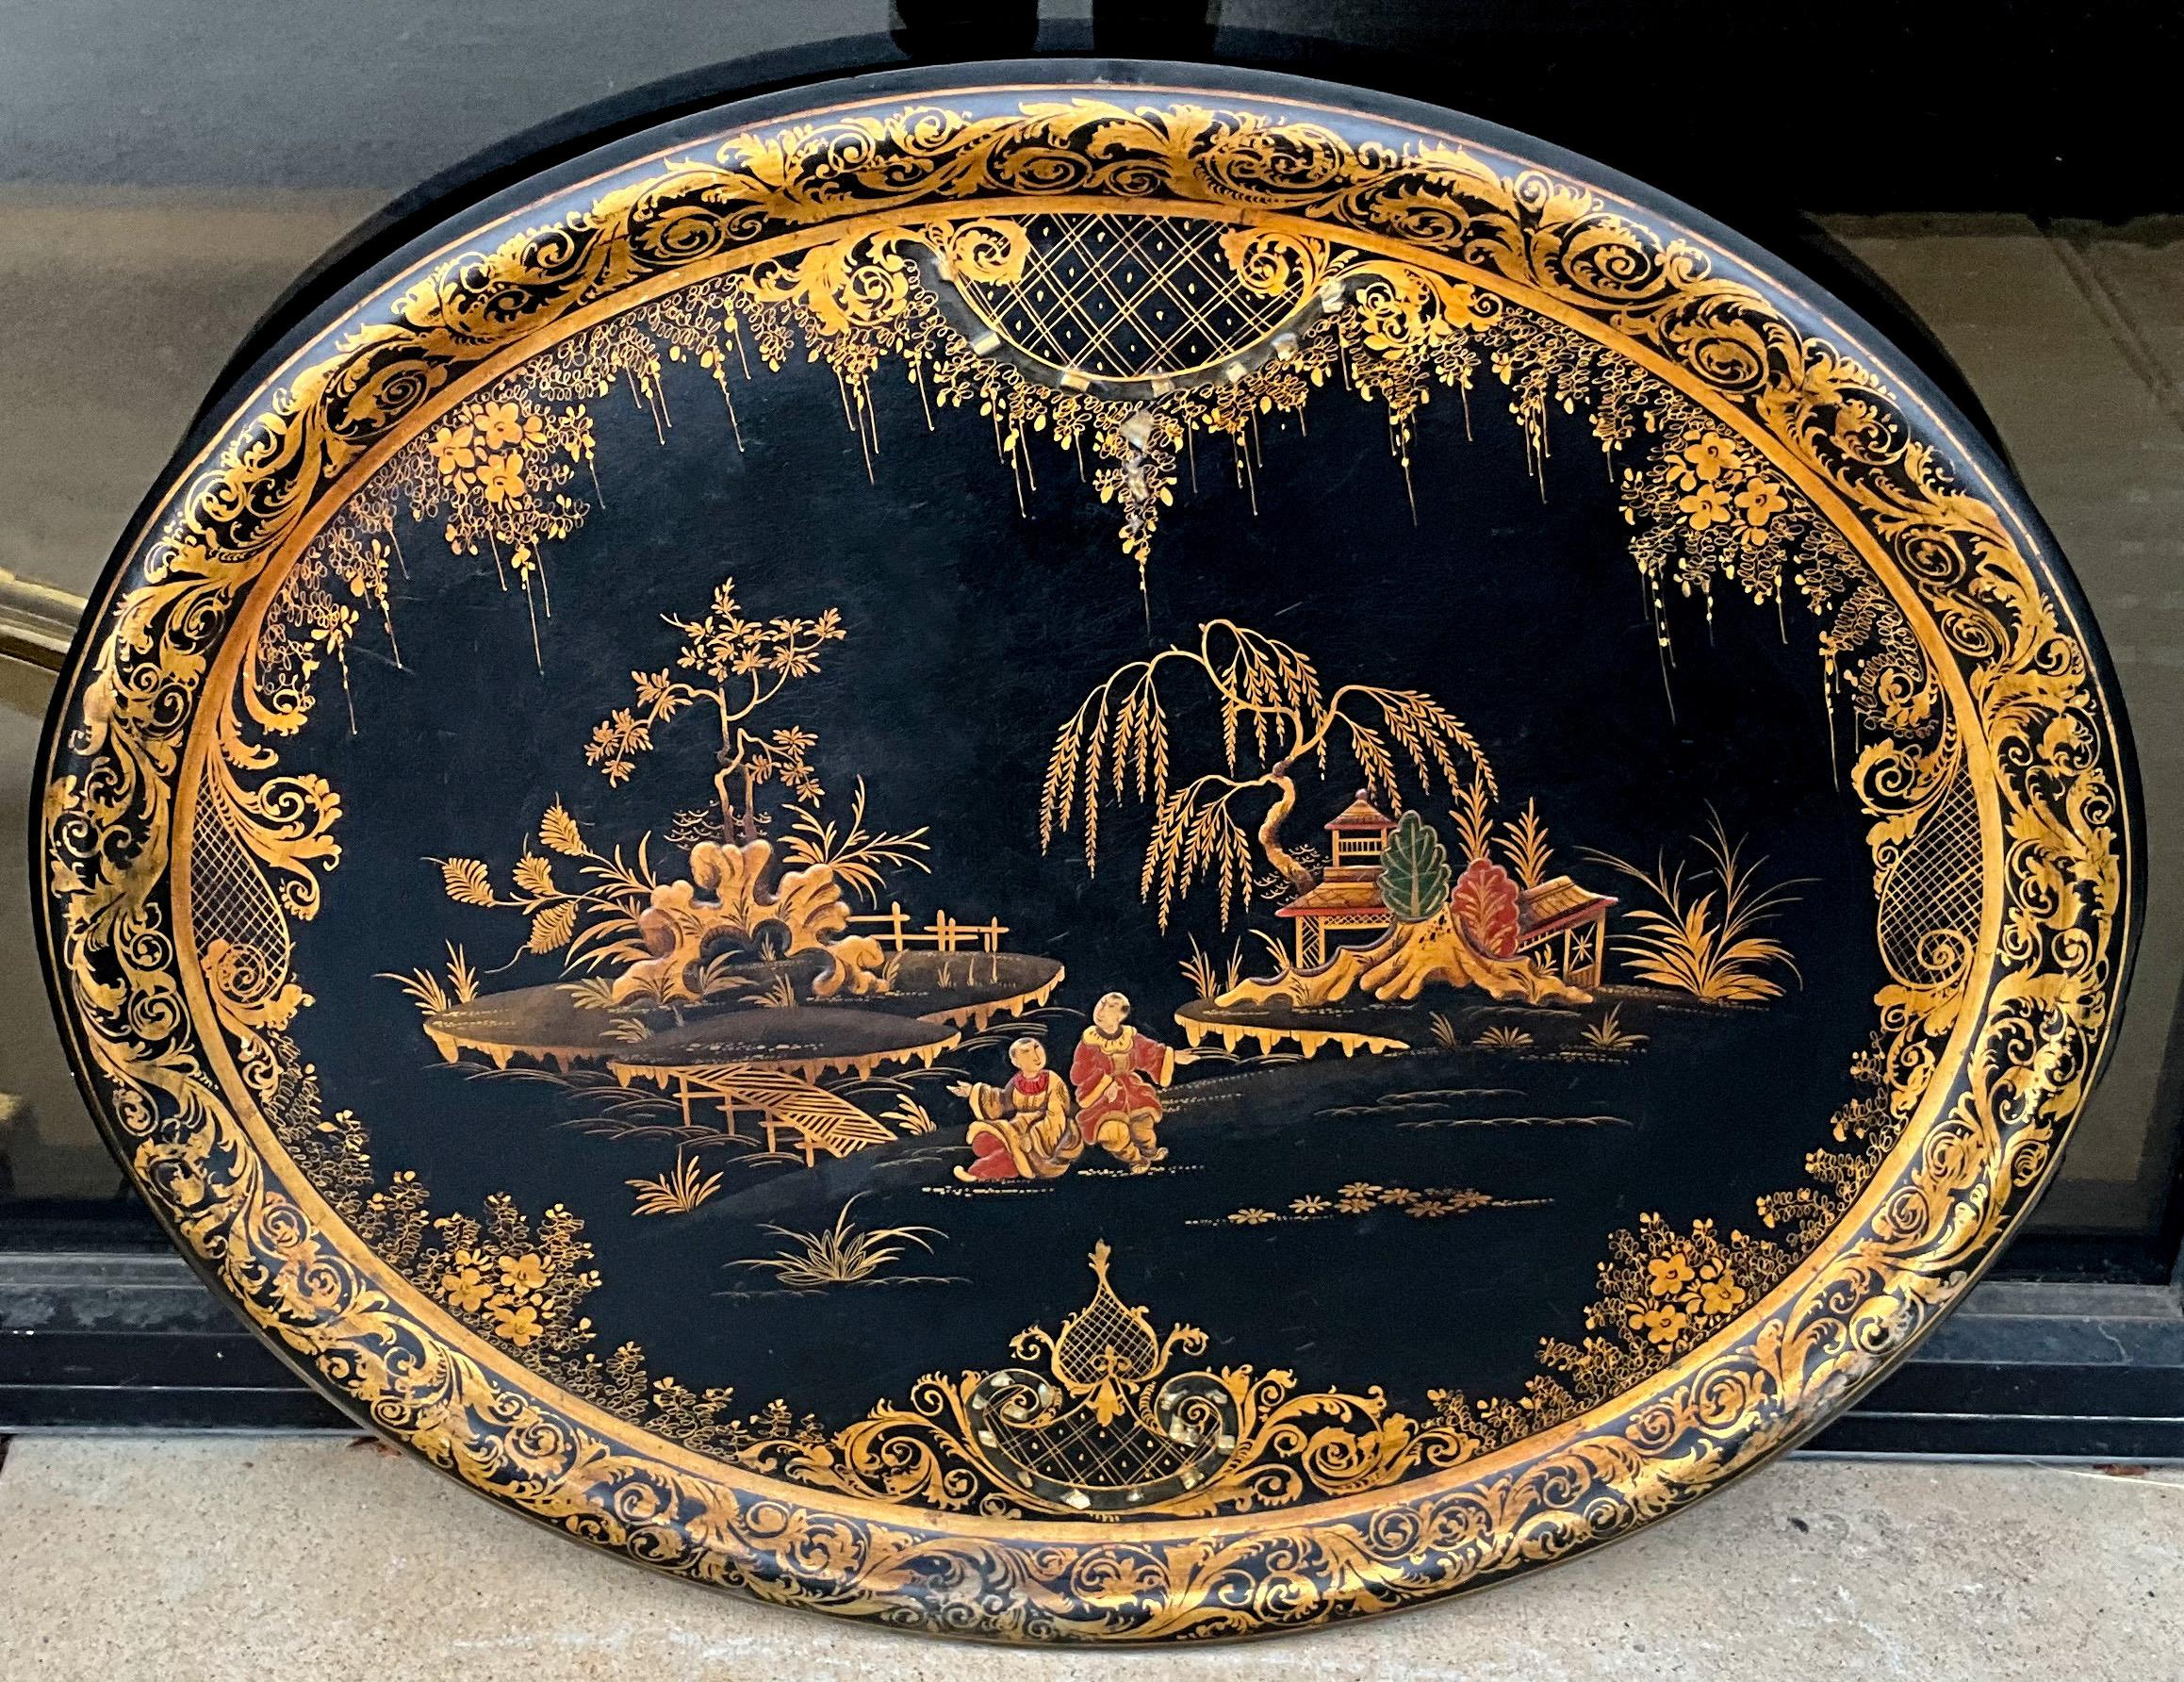 This is a 19th century Regency papier-mâché chinoiserie tray. In addition to the lovely pen-work, it has mother of pearl inlay. It is not marked. Lite and general wear.